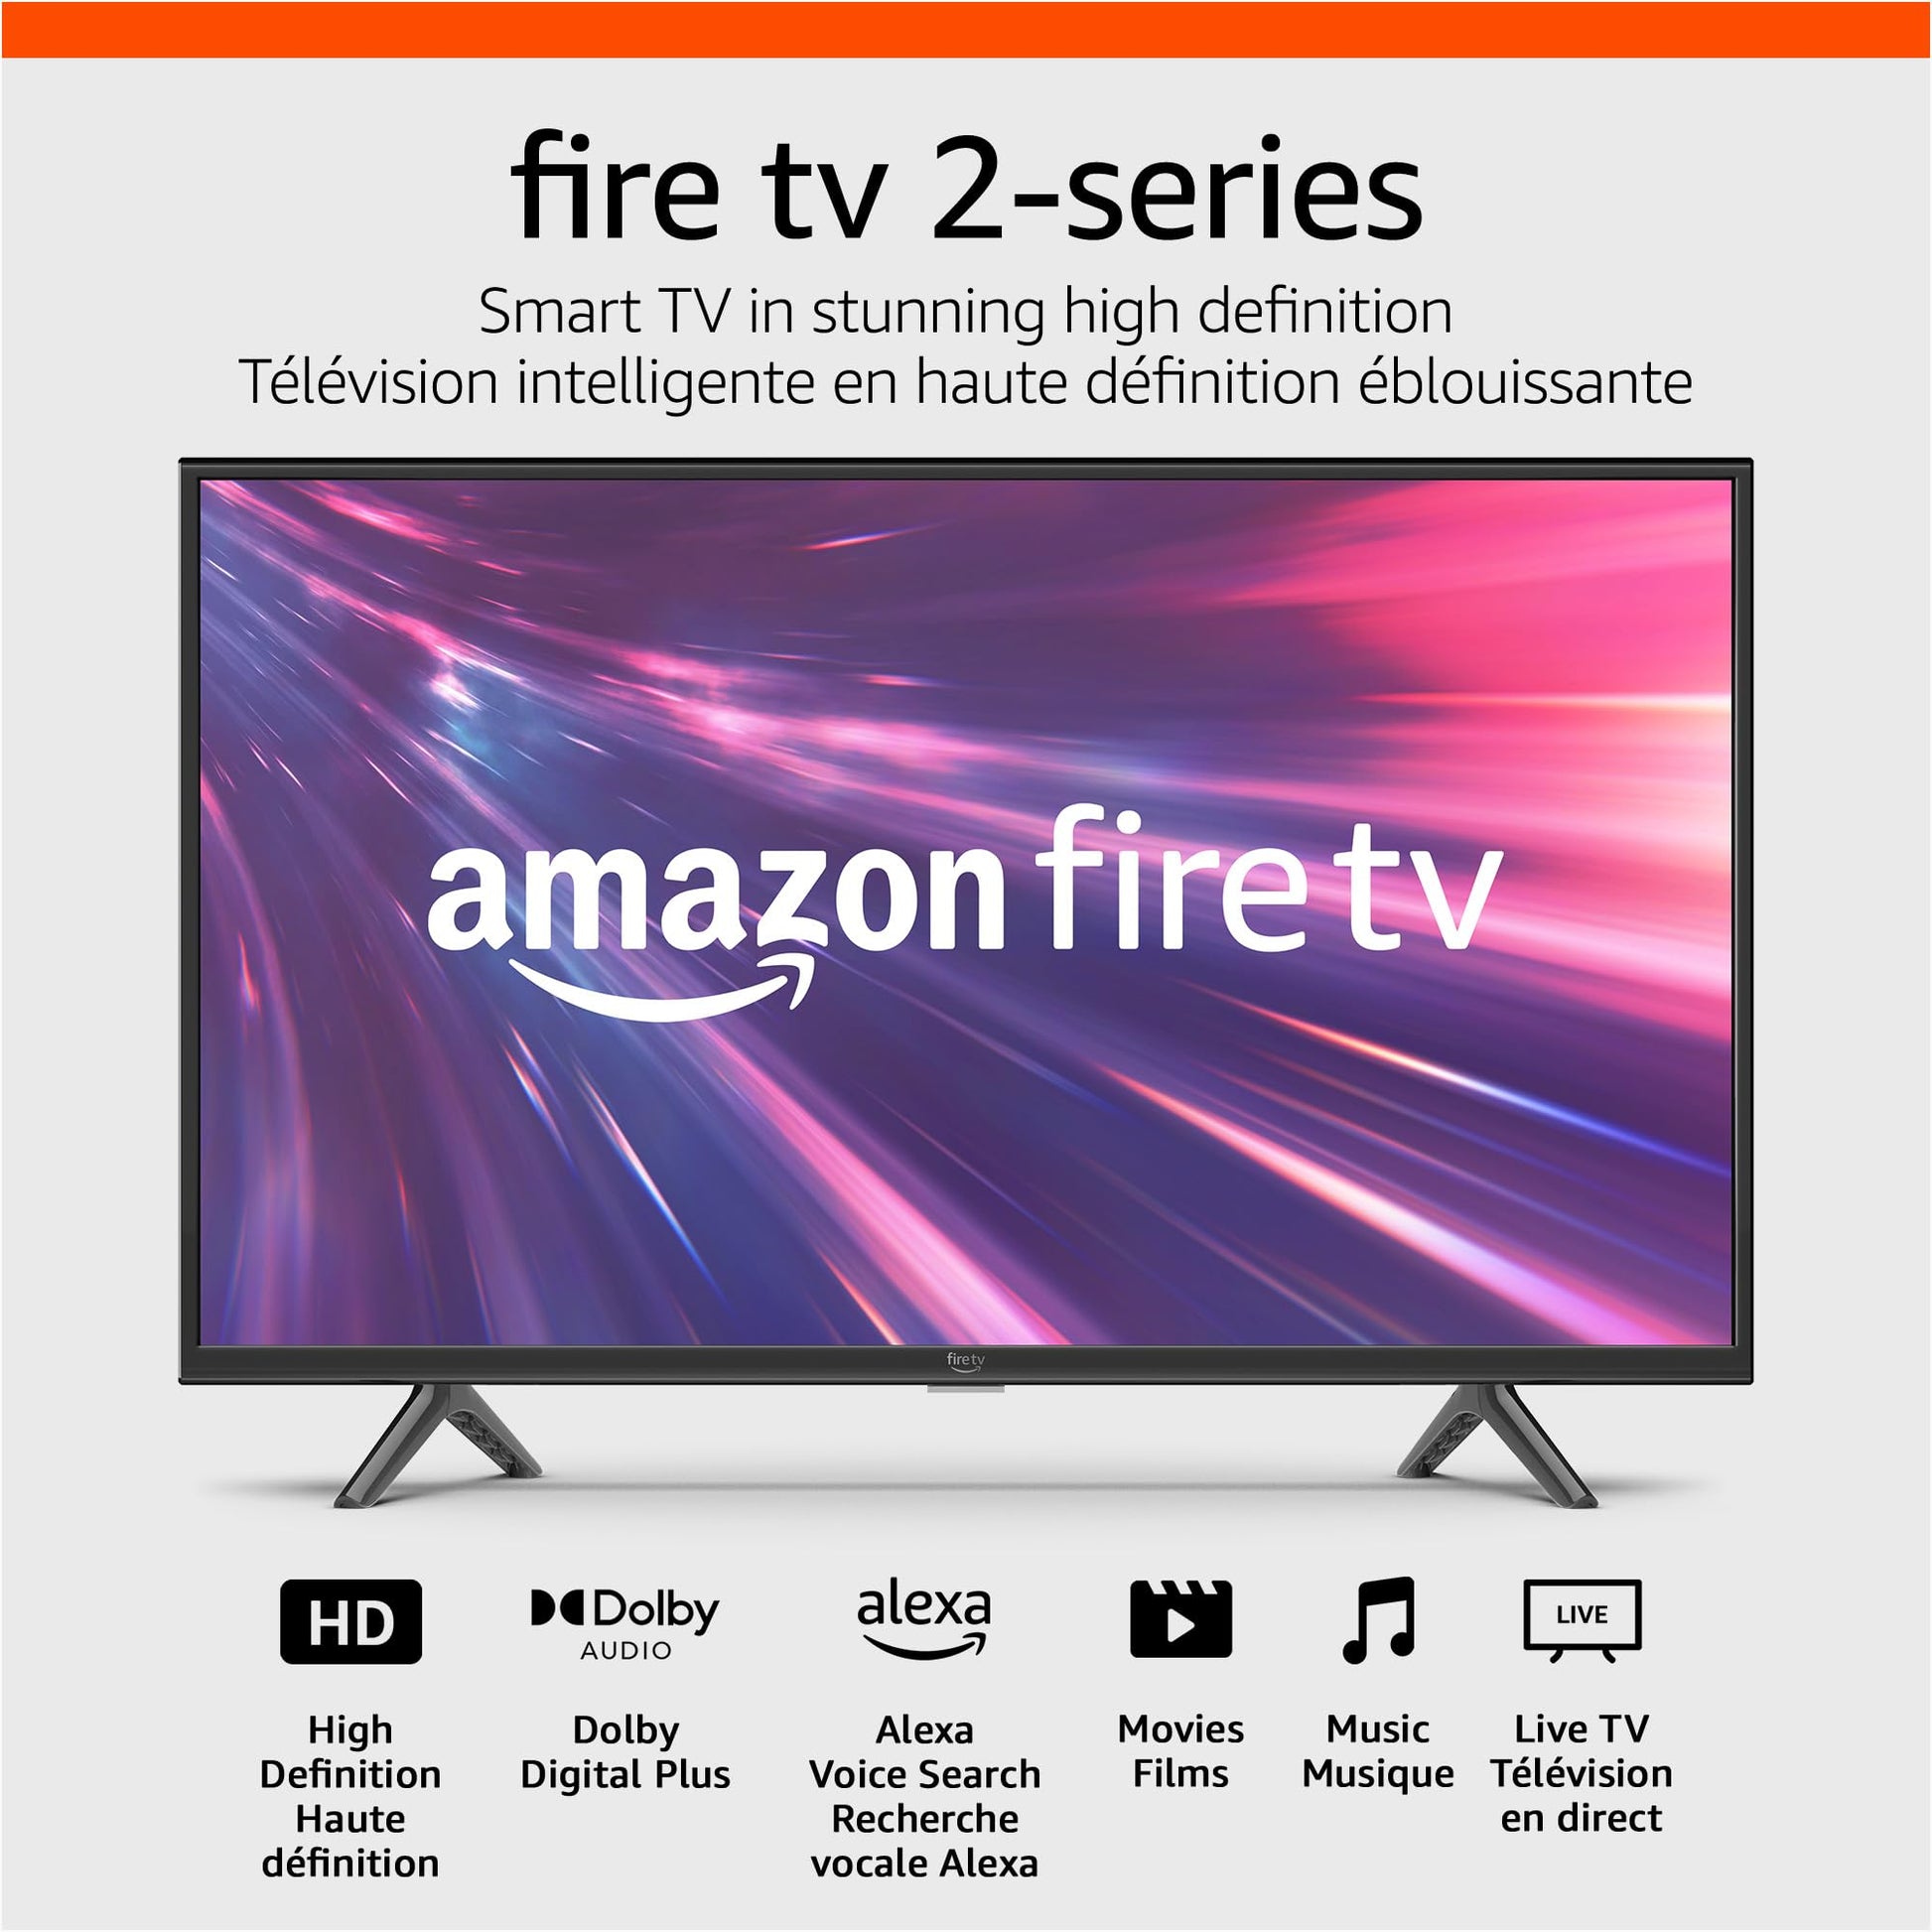 Amazon Fire TV 32" 2-Series HD smart TV, stream live TV without cable. Phil and Gazelle.